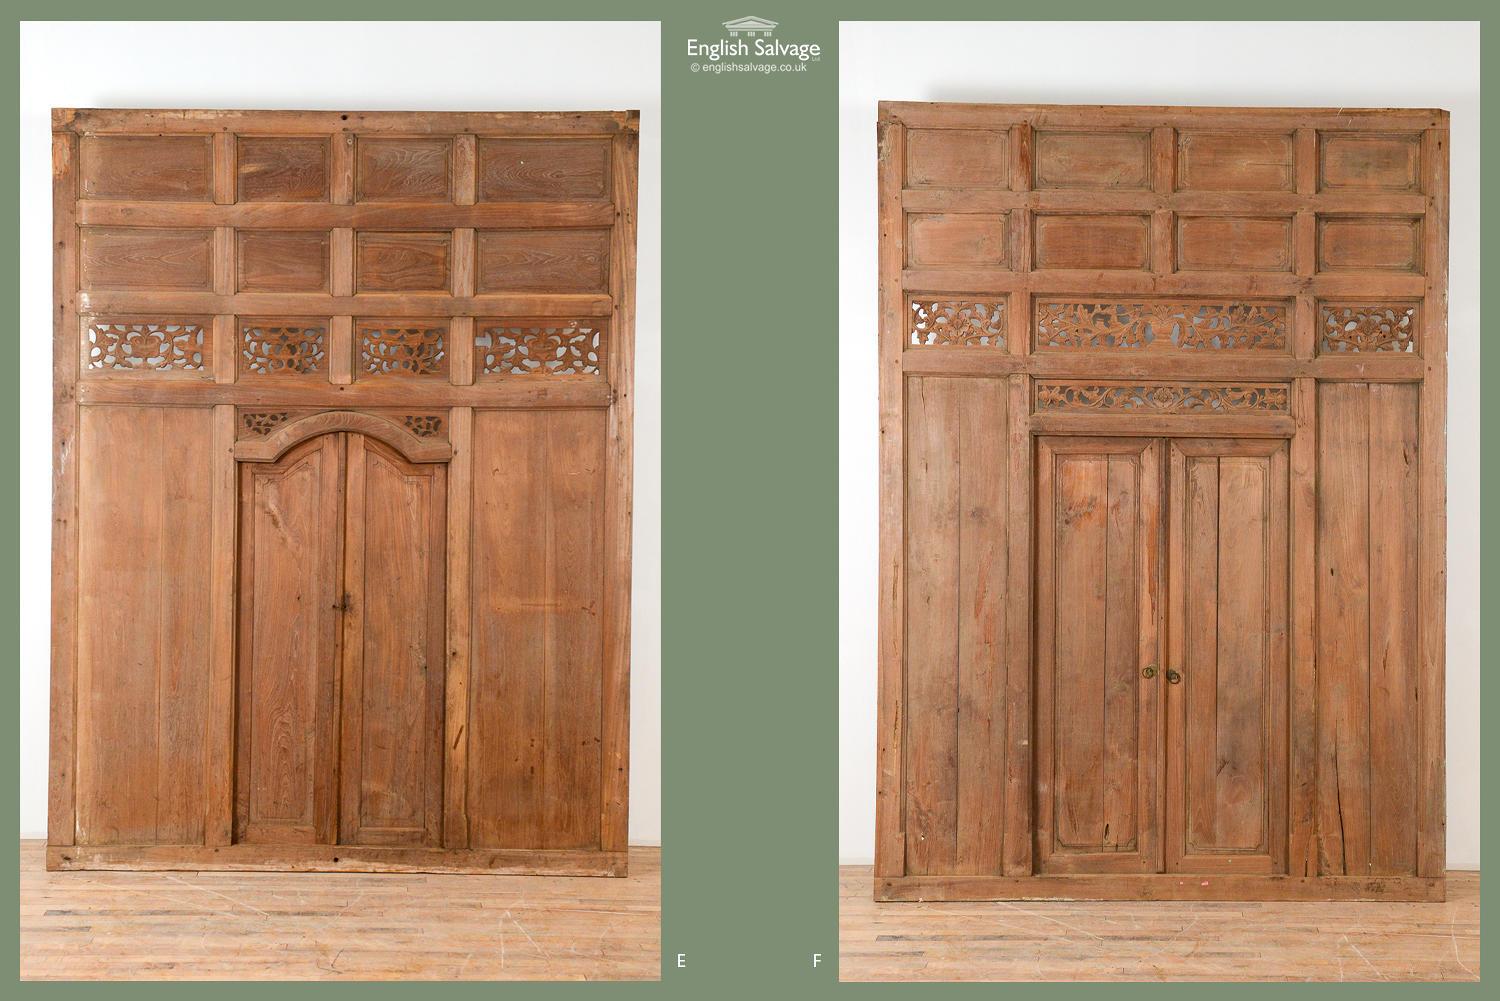 12.77 running metres of antique teak panelling from an old house in Indonesia. 6 panels as per photos. sizes of each panel as per below
Panel A: 235cm wide x 290cm high. Recessed part of the opening is 165cm wide x 193cm high (from ground) and 17cm